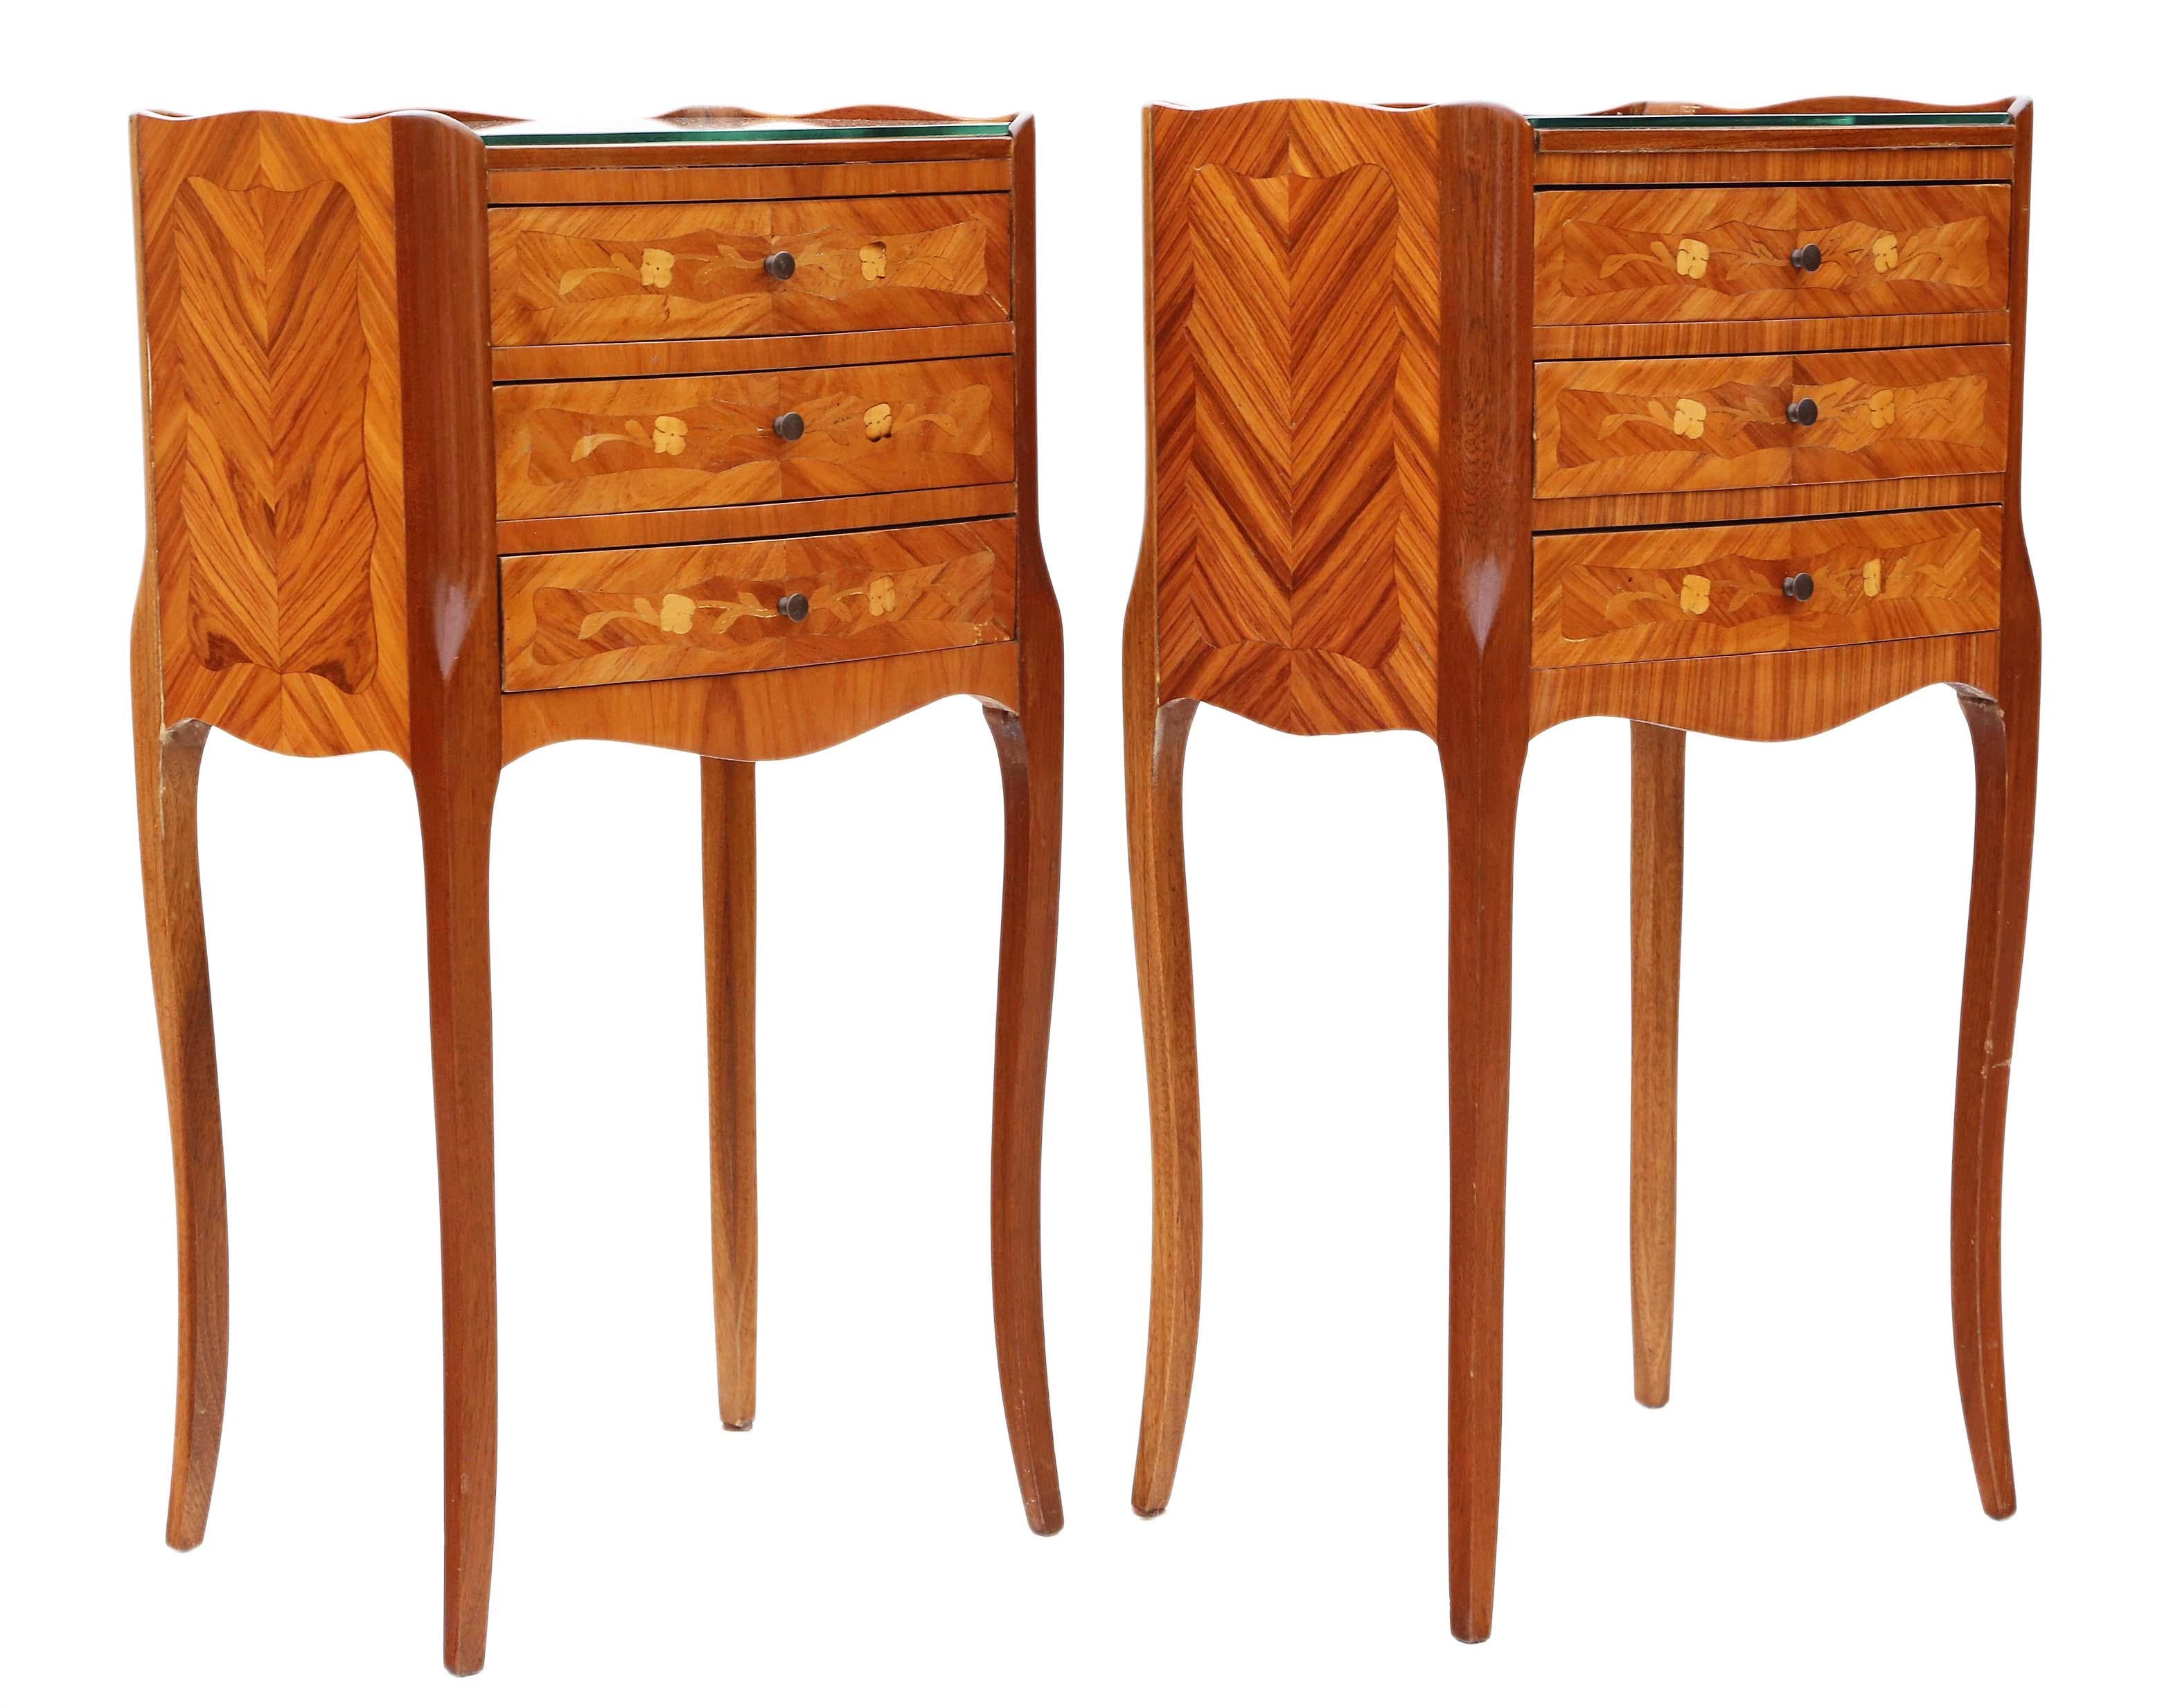 20th Century Pair of French Inlaid Marquetry Bedside Tables Cupboards